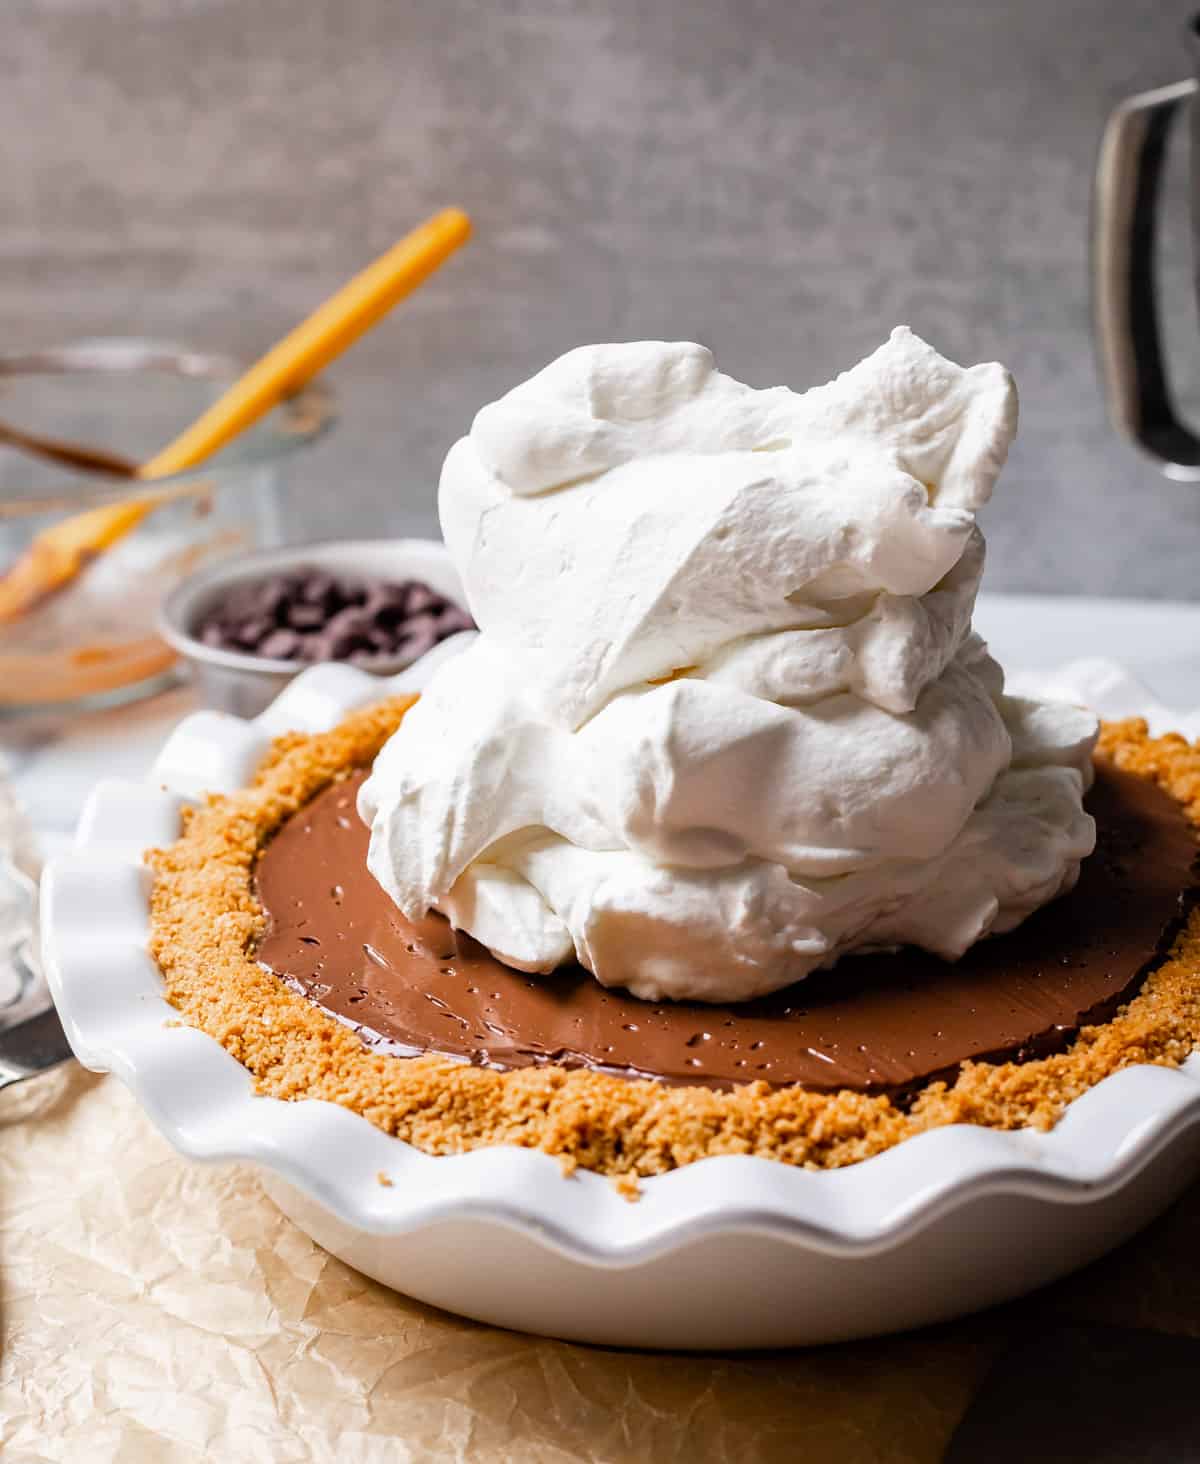 whipped cream piled high on a chocolate pie.